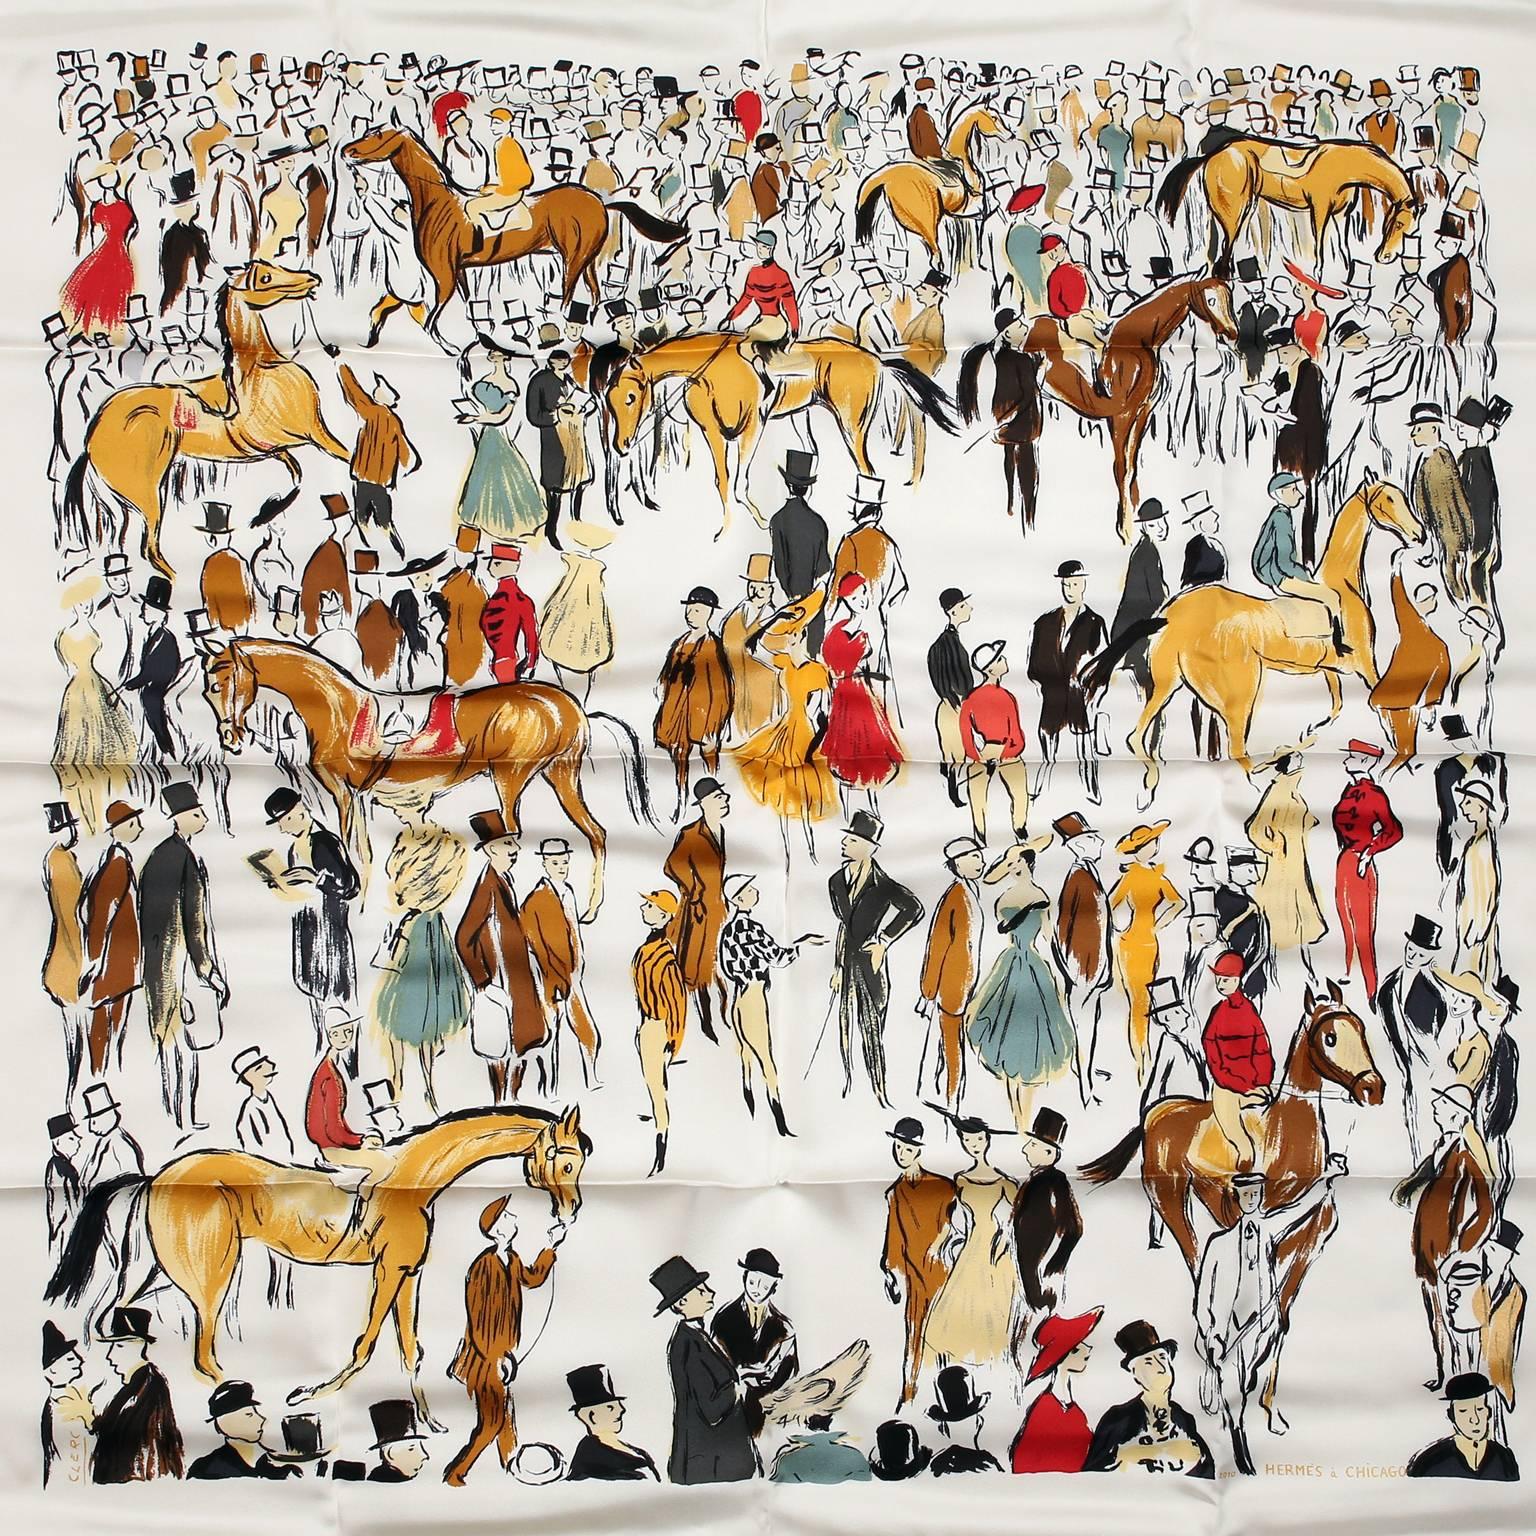 Hermès White Paddock 90 cm Silk Scarf- NEW with the original box
 The limited edition was reissued for the Chicago Boutique opening in 2010. Originally designed by Jean-Louis Clerc, the print features a white and neutral colorway with people and